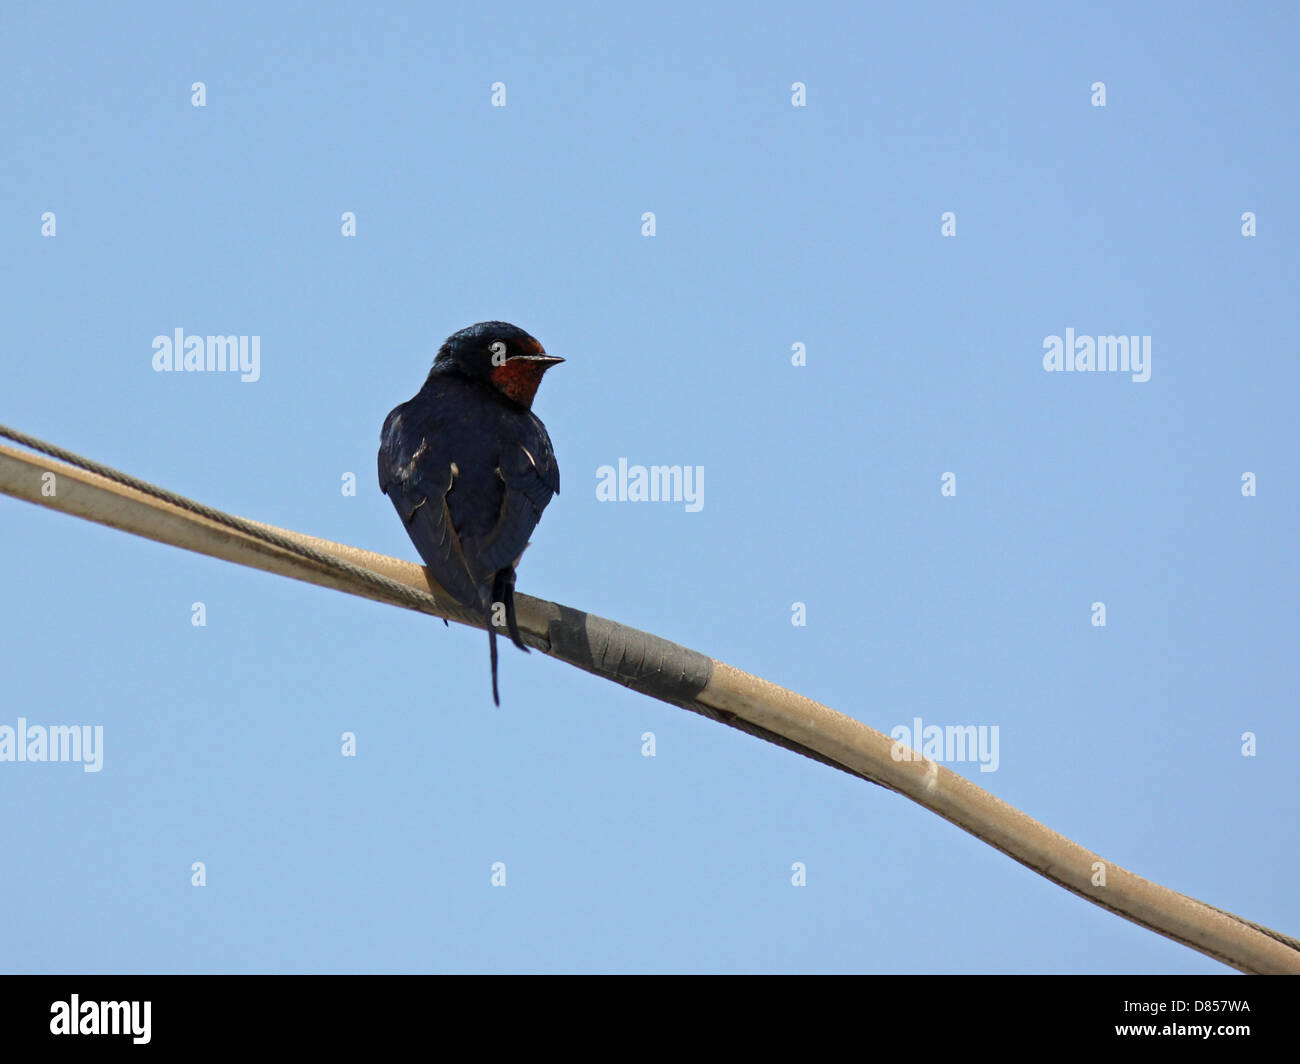 Barn Swallow sitting on cable over blue sky Stock Photo